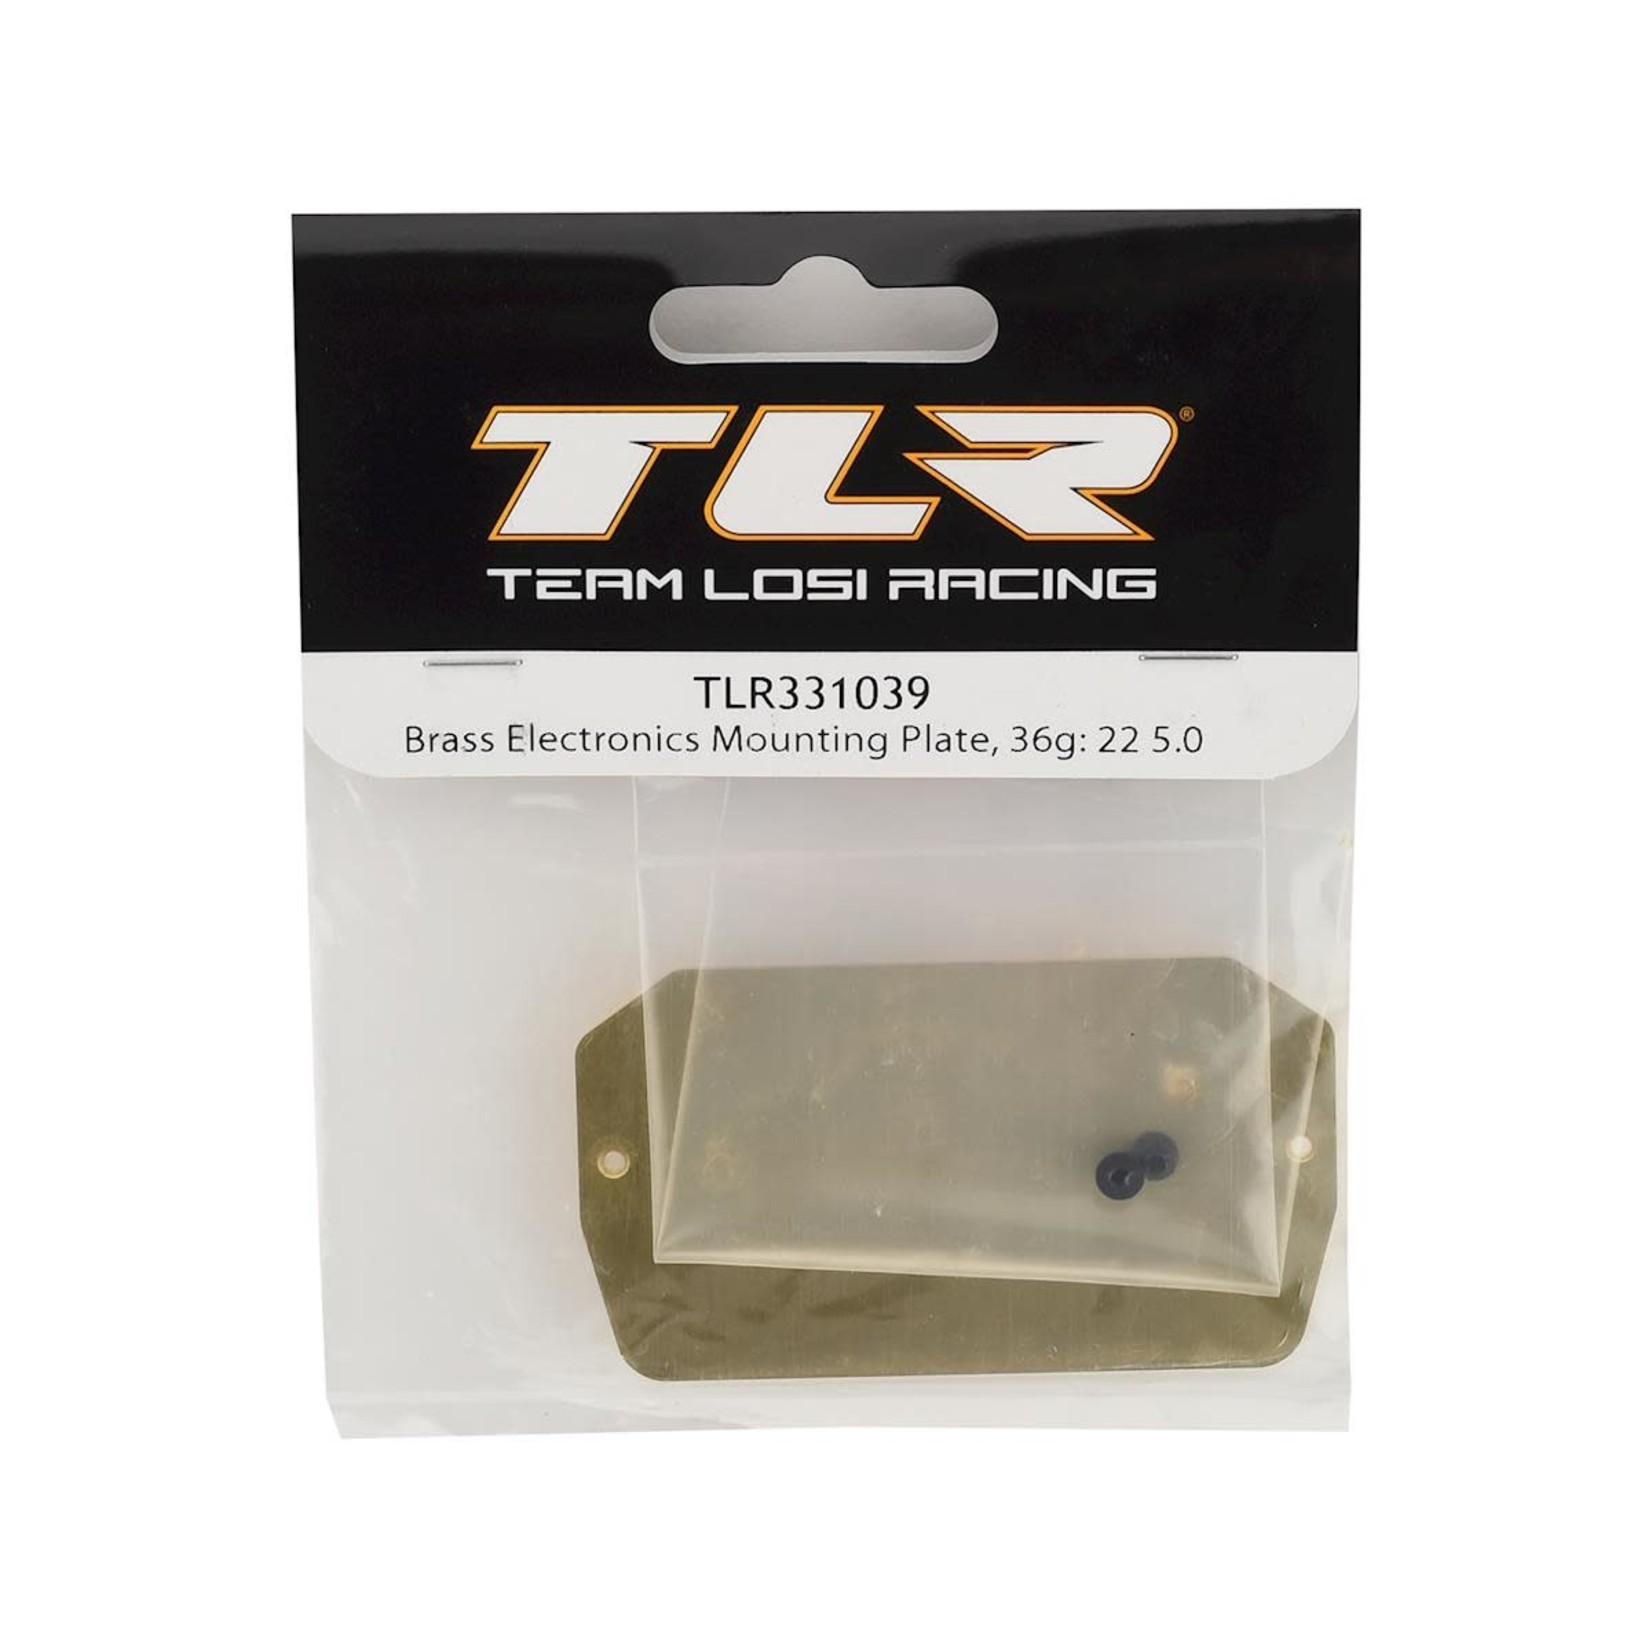 TLR Team Losi Racing 22 5.0 Brass Electronics Mounting Plate (36g) #TLR331039